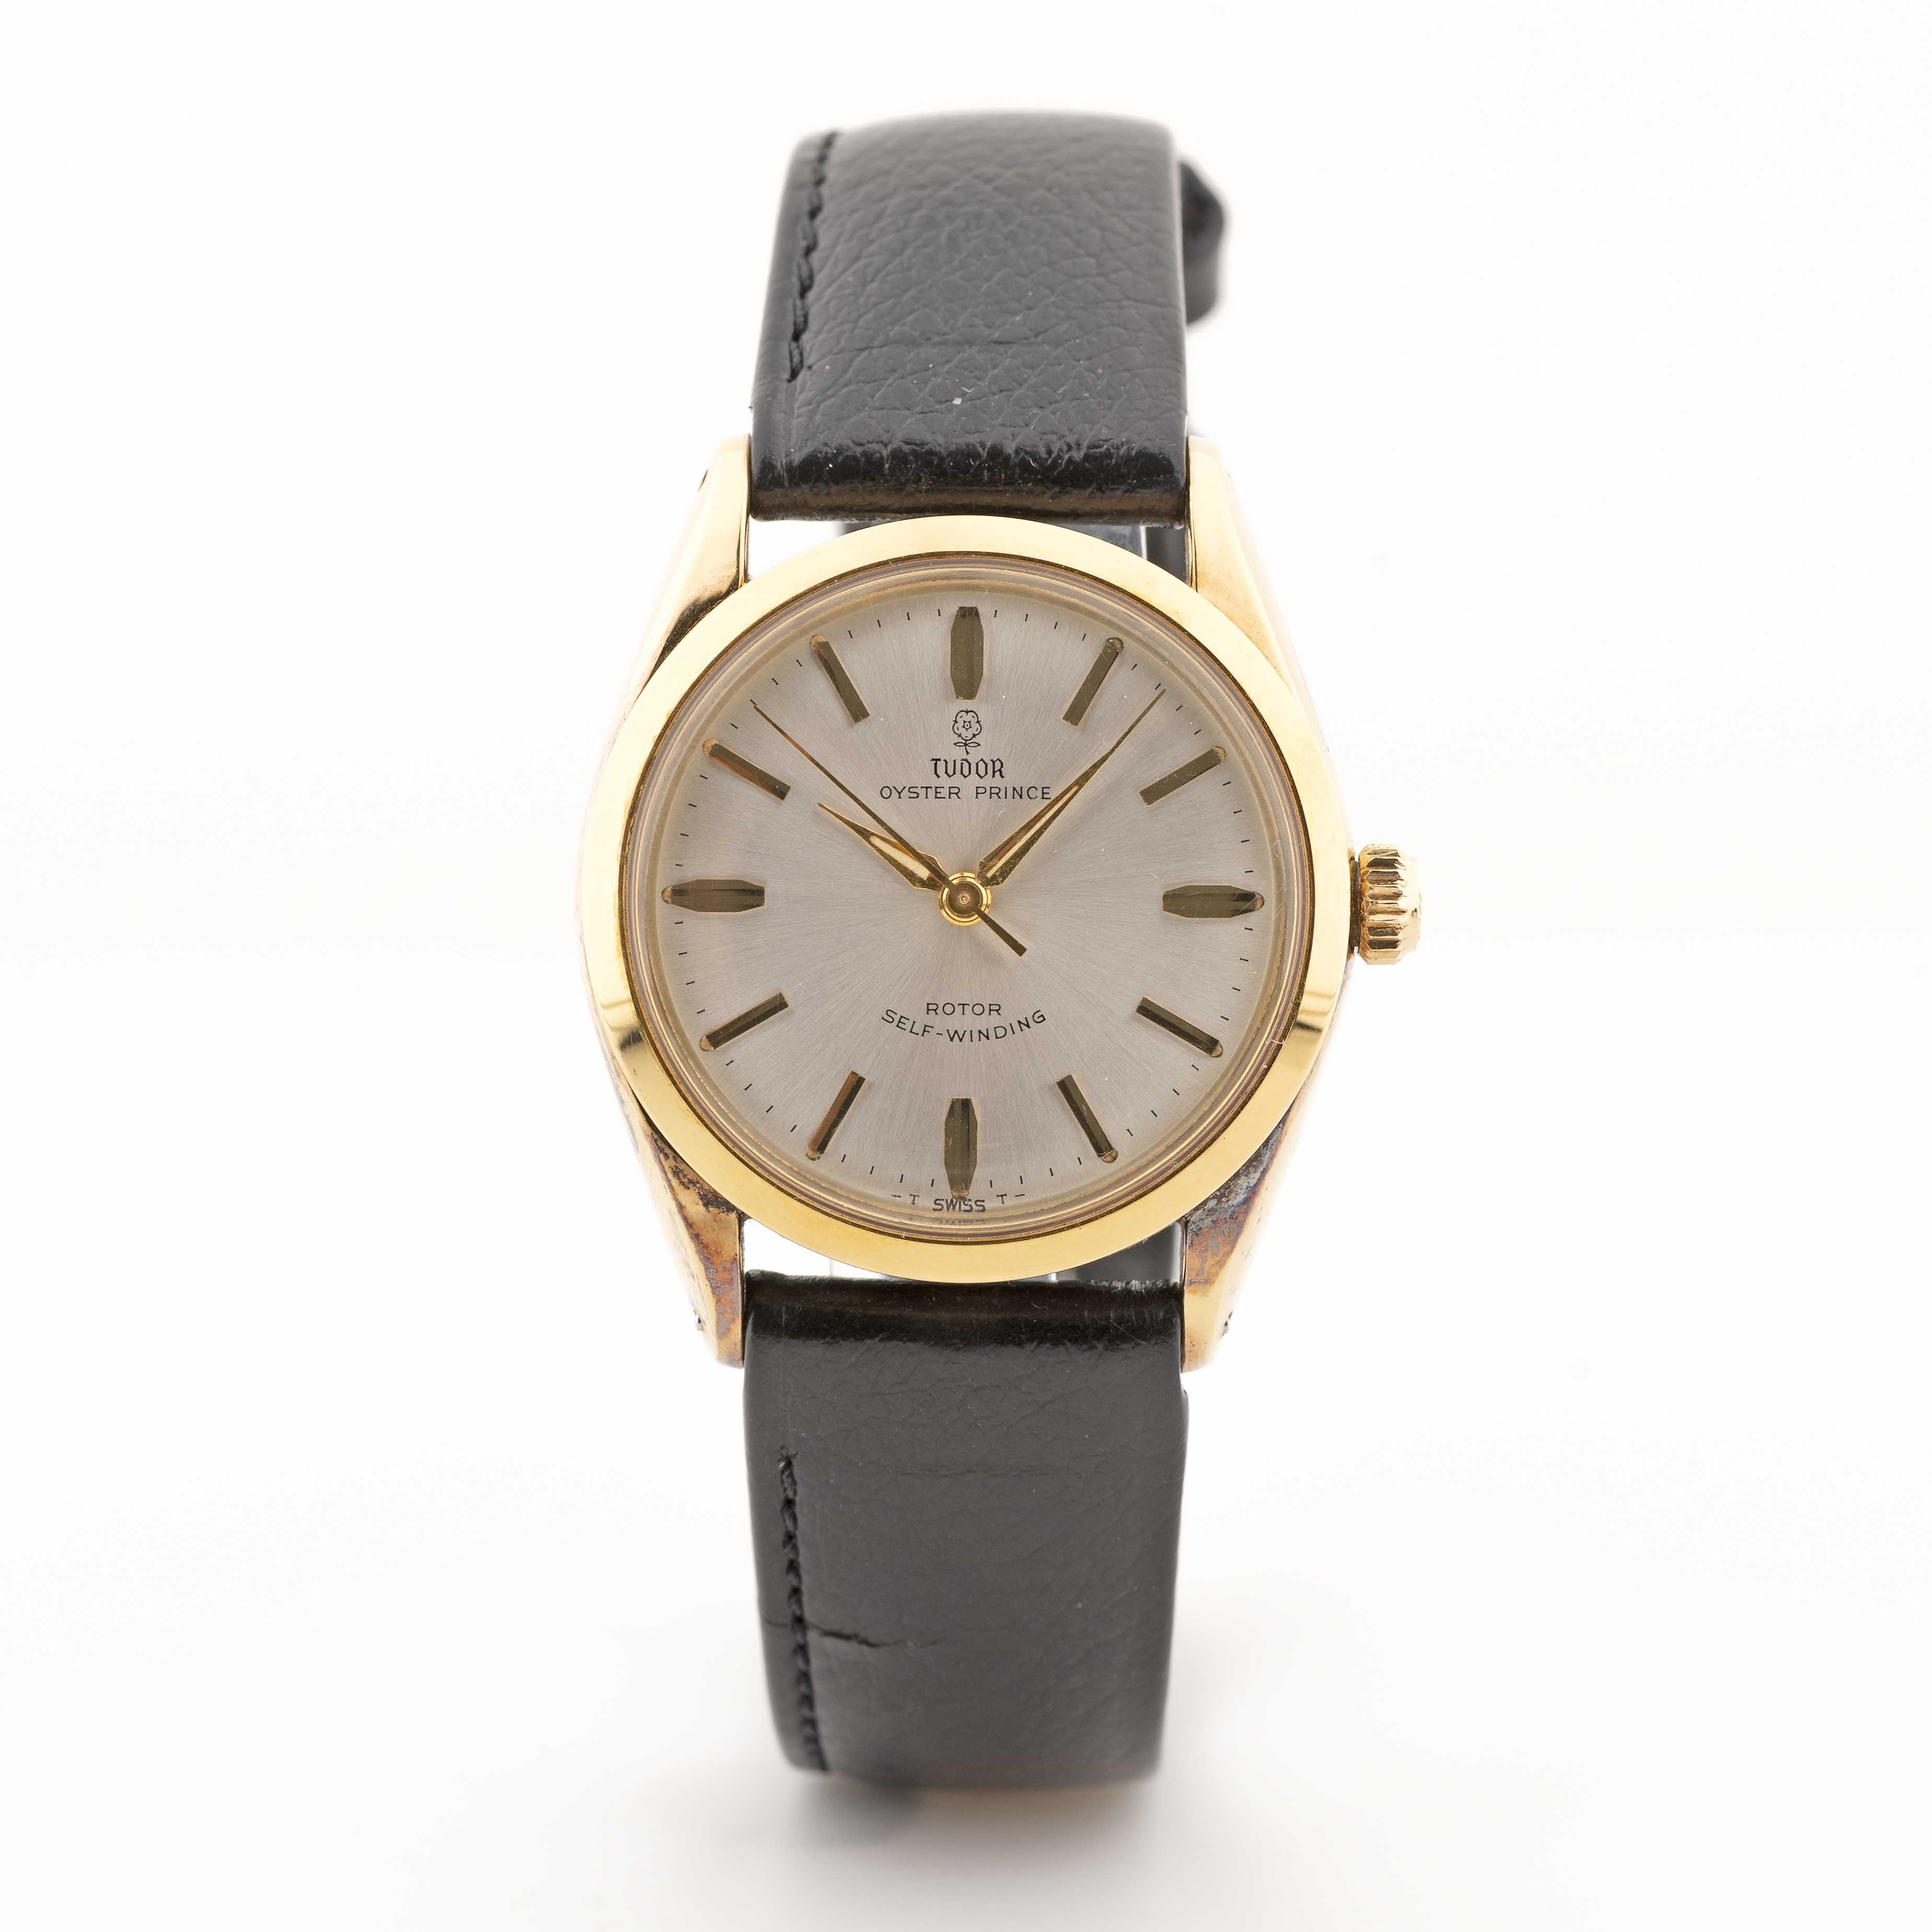 A GENTLEMAN'S GOLD PLATED TUDOR OYSTER PRINCE SELF WINDING WRIST WATCH DATED 1970, REF. 7965 WITH - Image 3 of 12